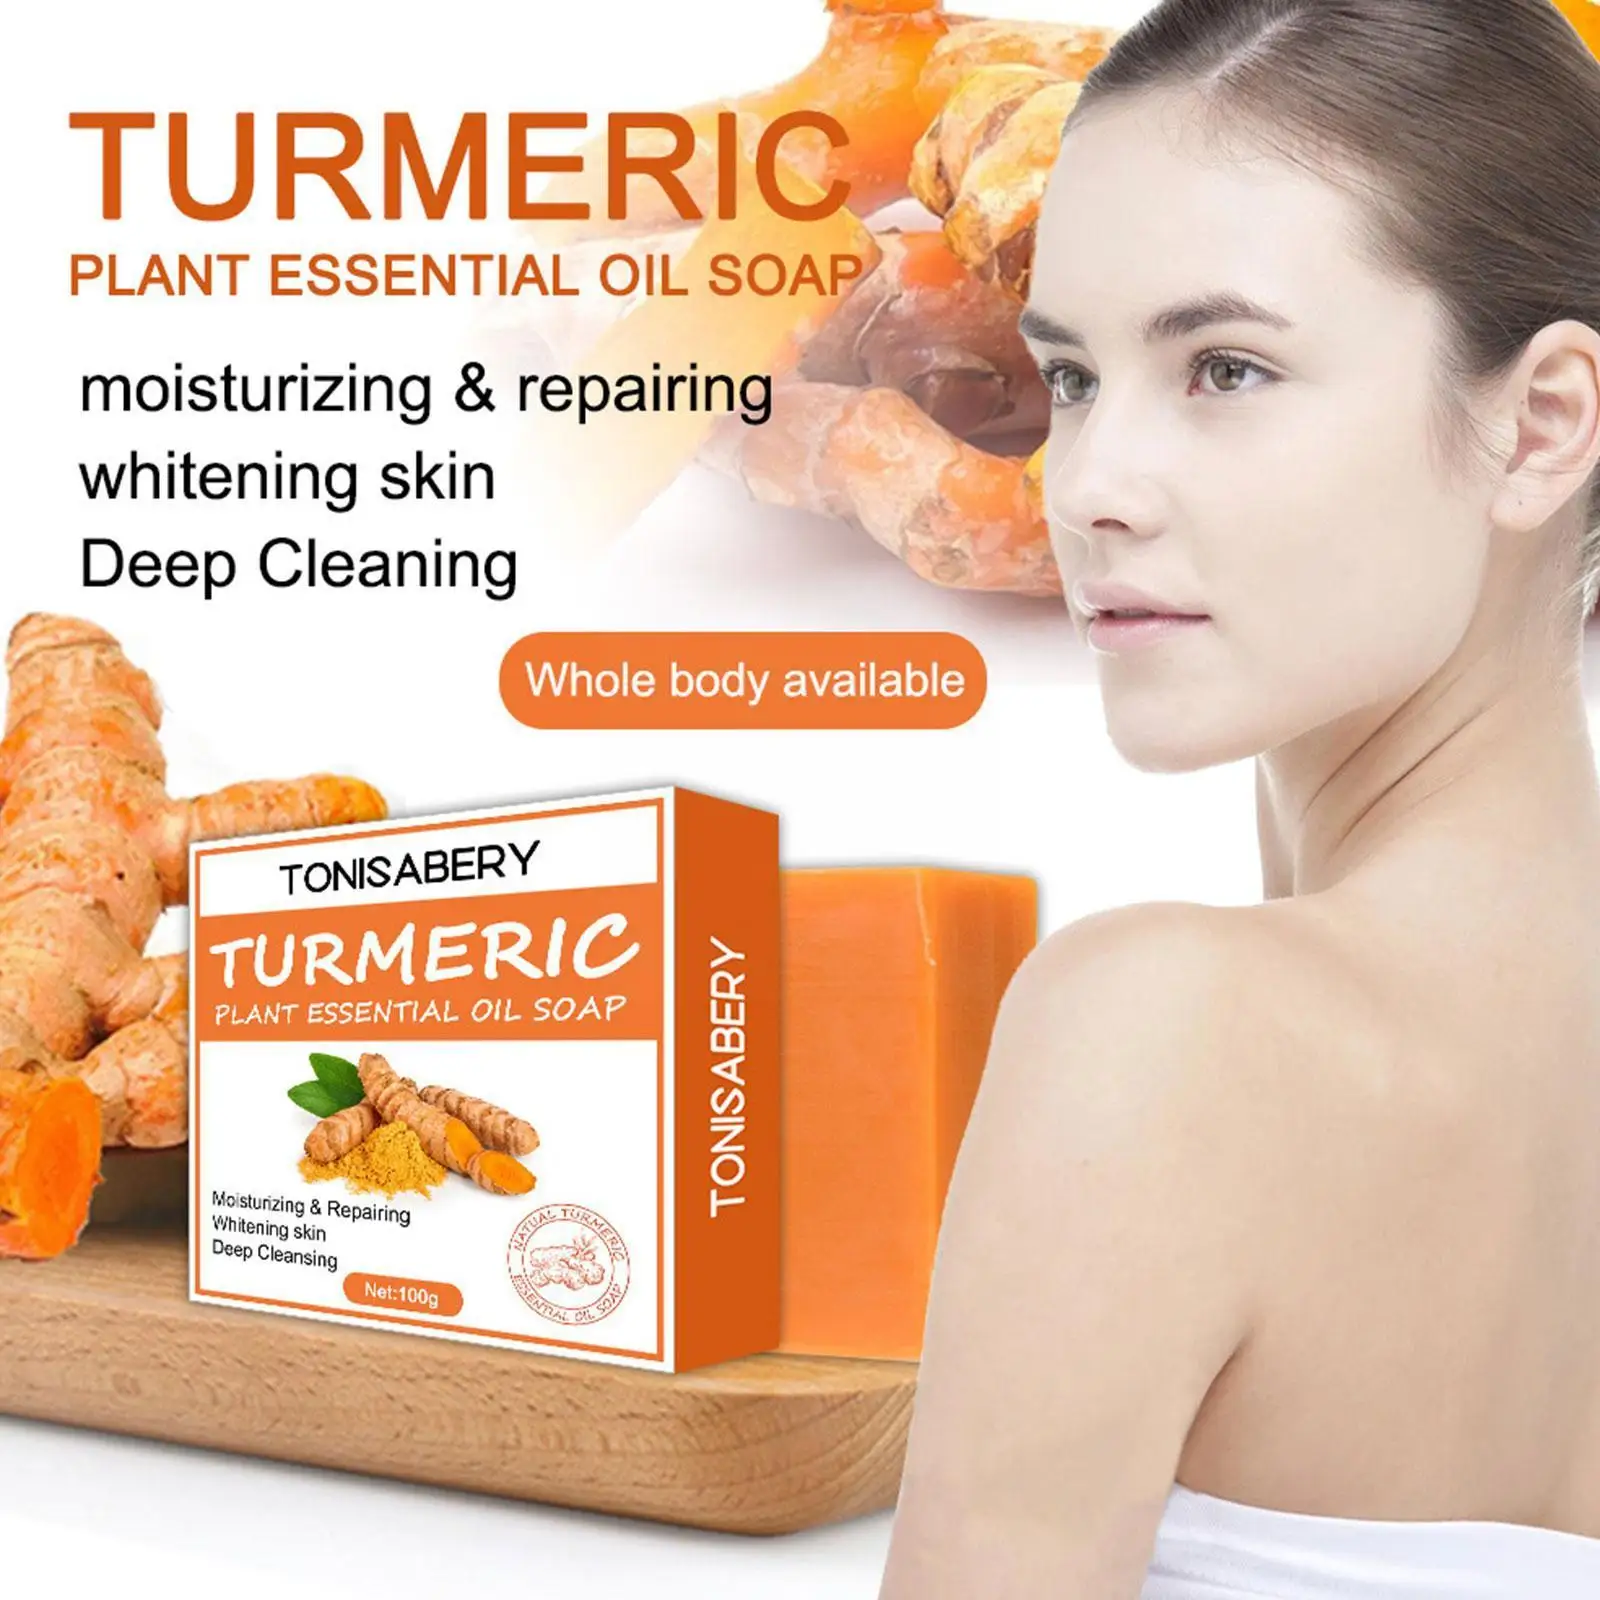 

Turmeric Cream Whitening Soap Natural Radiant Skin Spots Wrinkles And Facial Handmade Soap Reduction Scars Smoothing Acne D E1K3